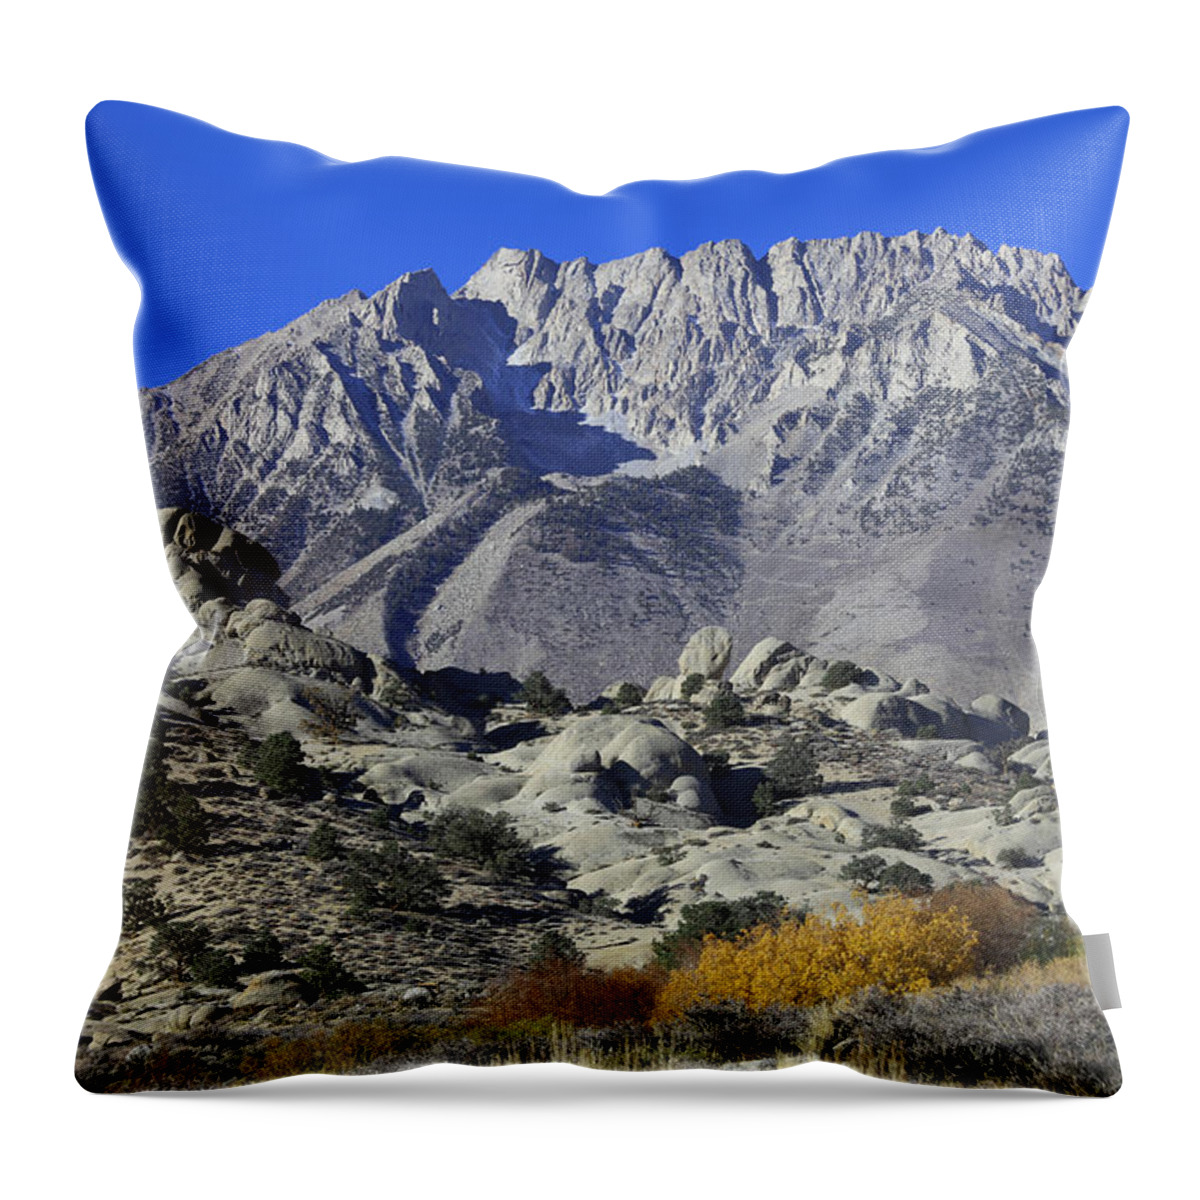 Owens Valley Throw Pillow featuring the photograph Basin Mountain by Tammy Pool